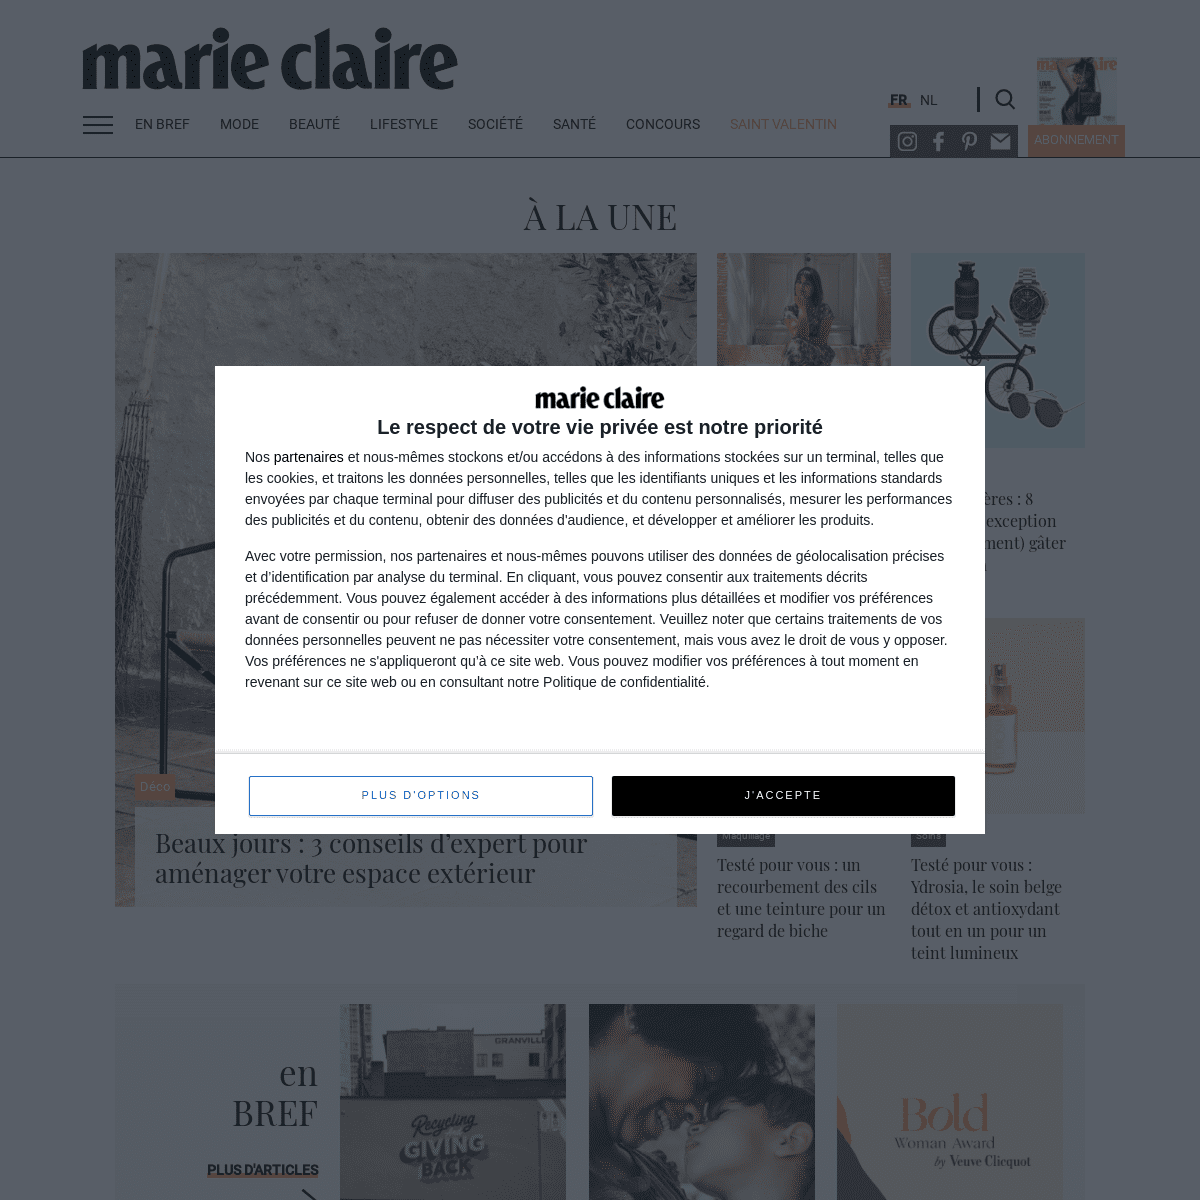 A complete backup of https://marieclaire.be